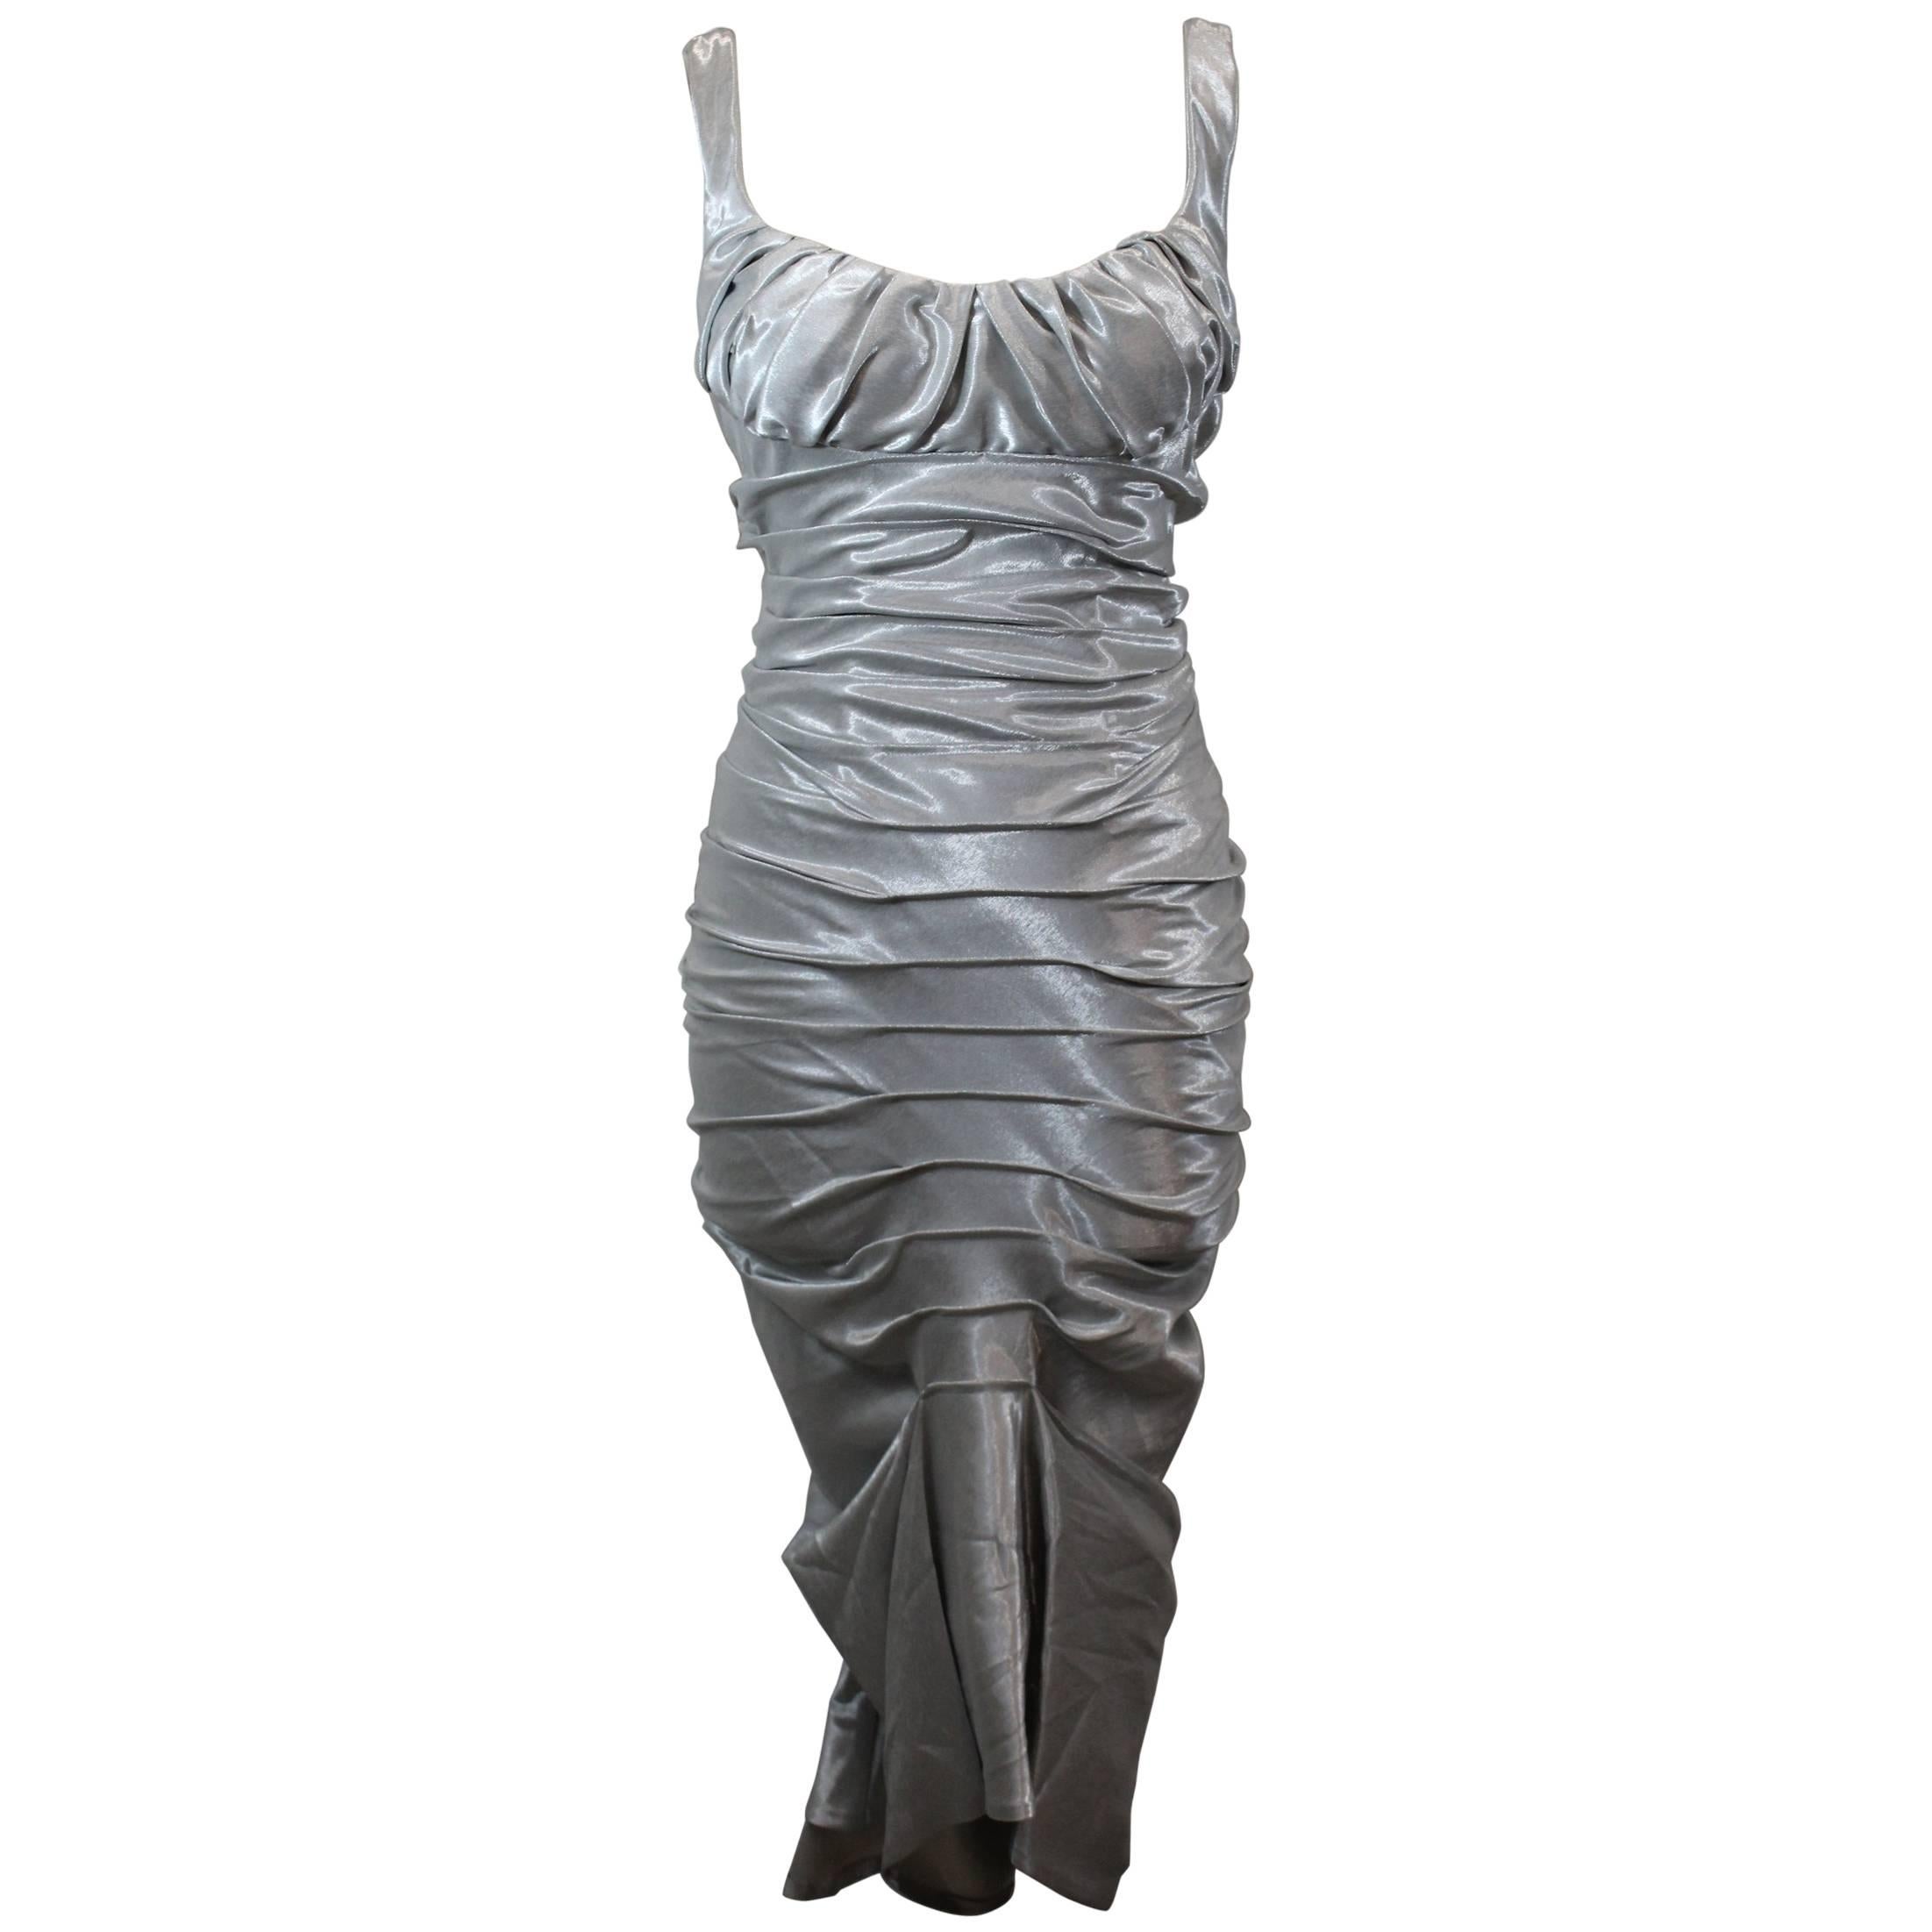 Amazing 2006 Paco Rabanne Silver Dress / Gown. Size 36 French